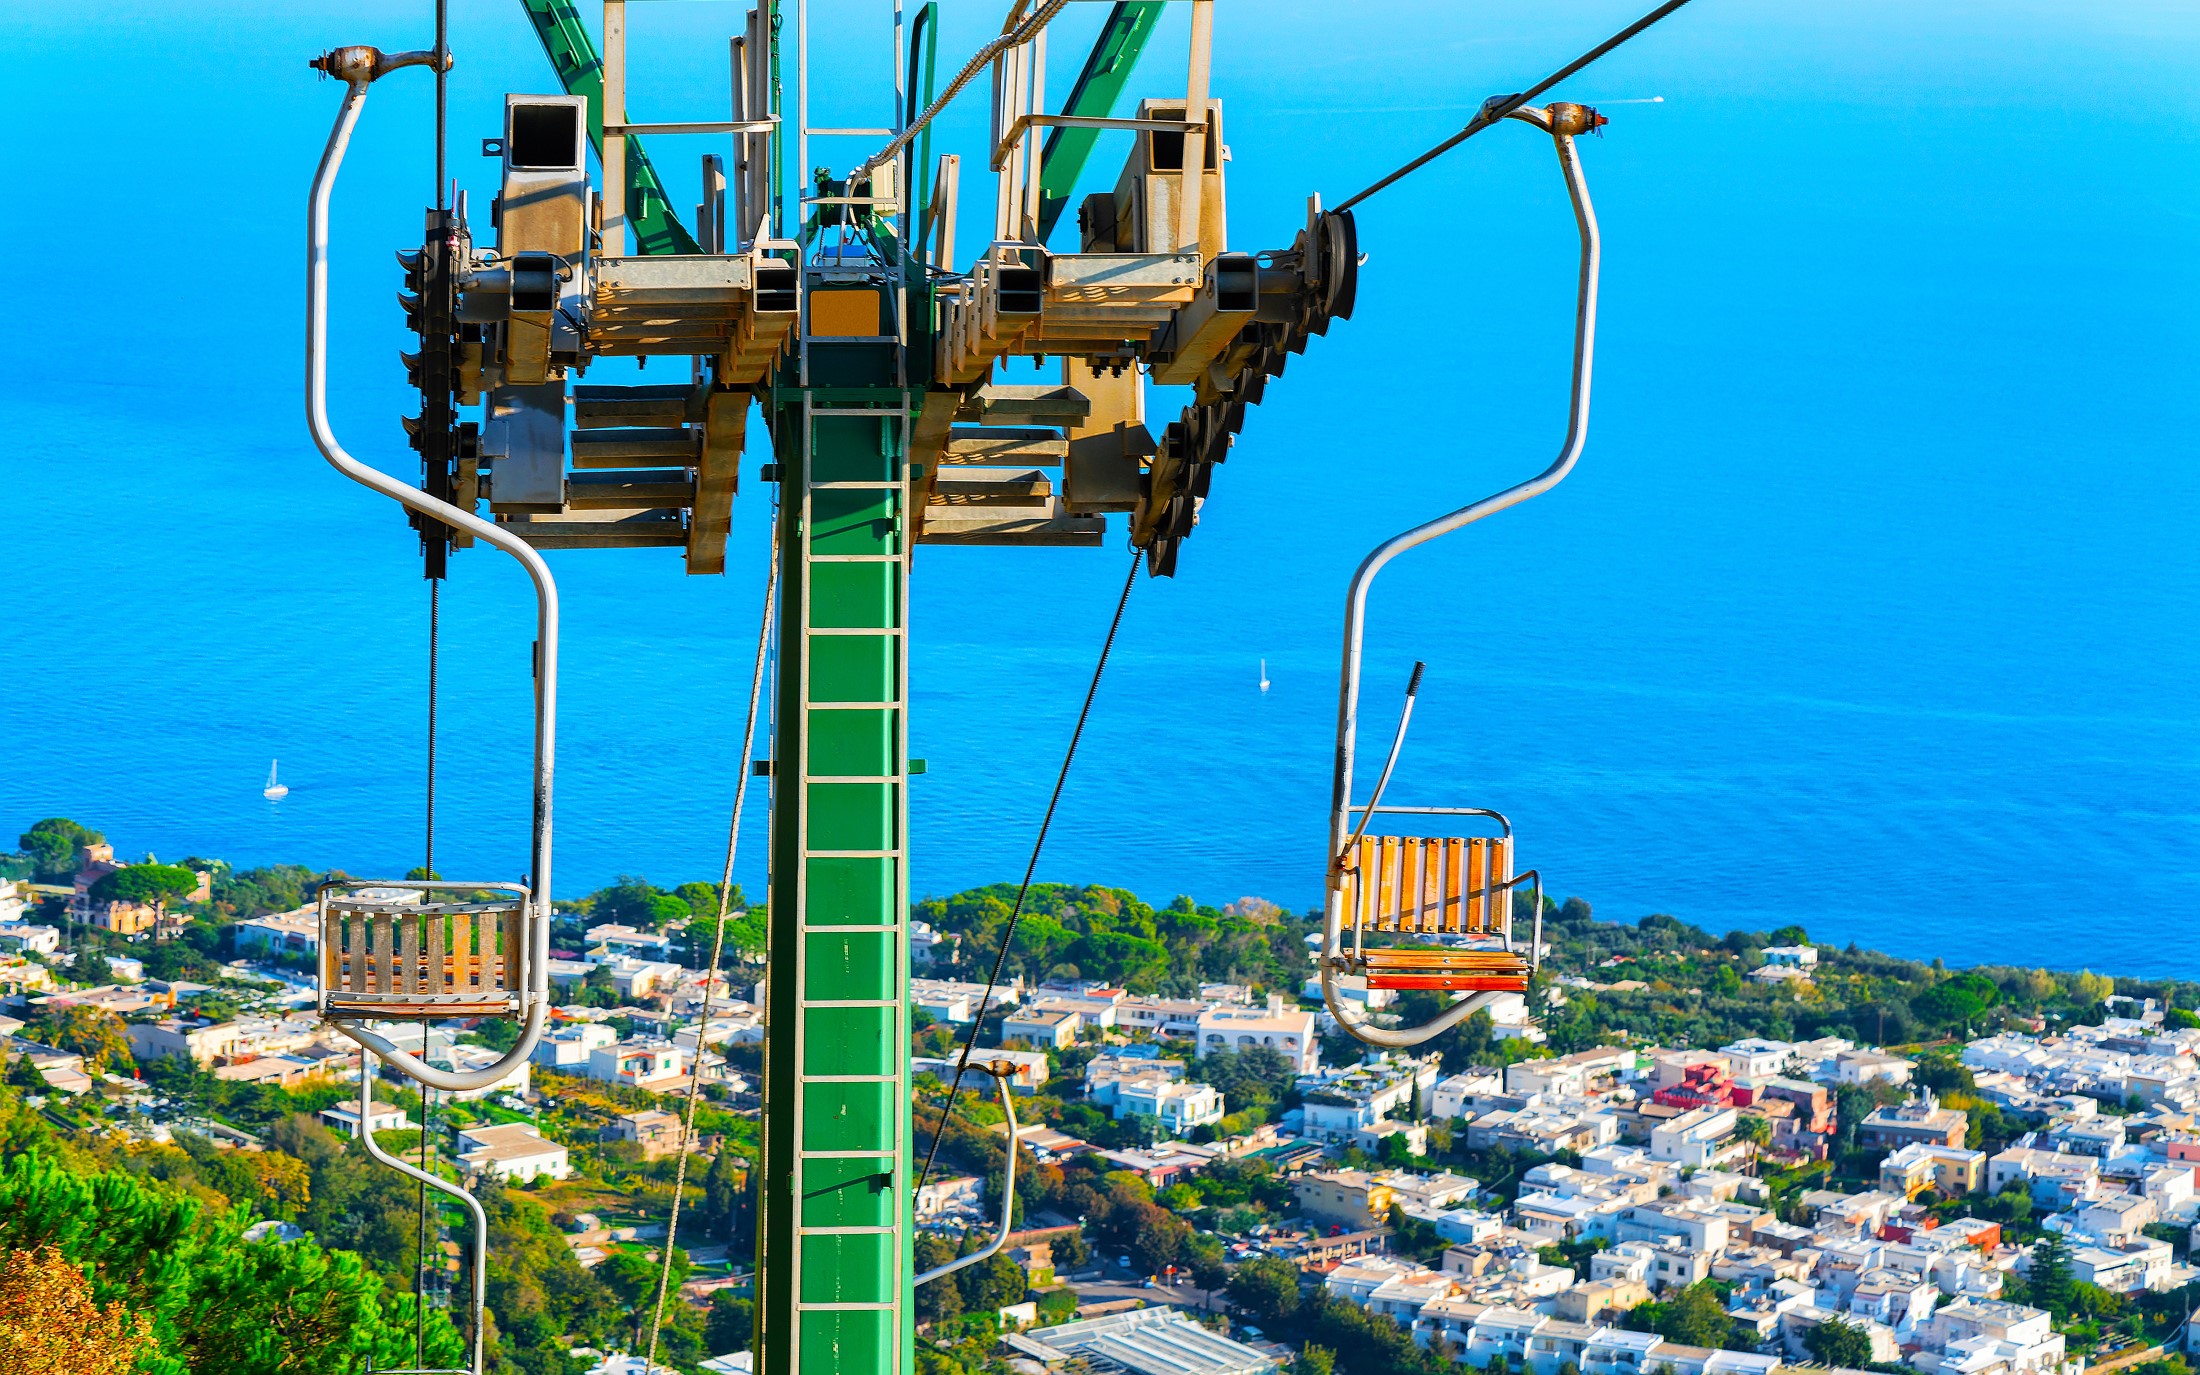 Seggiovia Monte Solaro, Chair lifts in Capri Island town at Naples in Italy. Landscape with deck chairs and Blue Mediterranean Sea at Italian coast. Anacapri in Europe. View on summer. Amalfi scenery. Holiday and vacation.